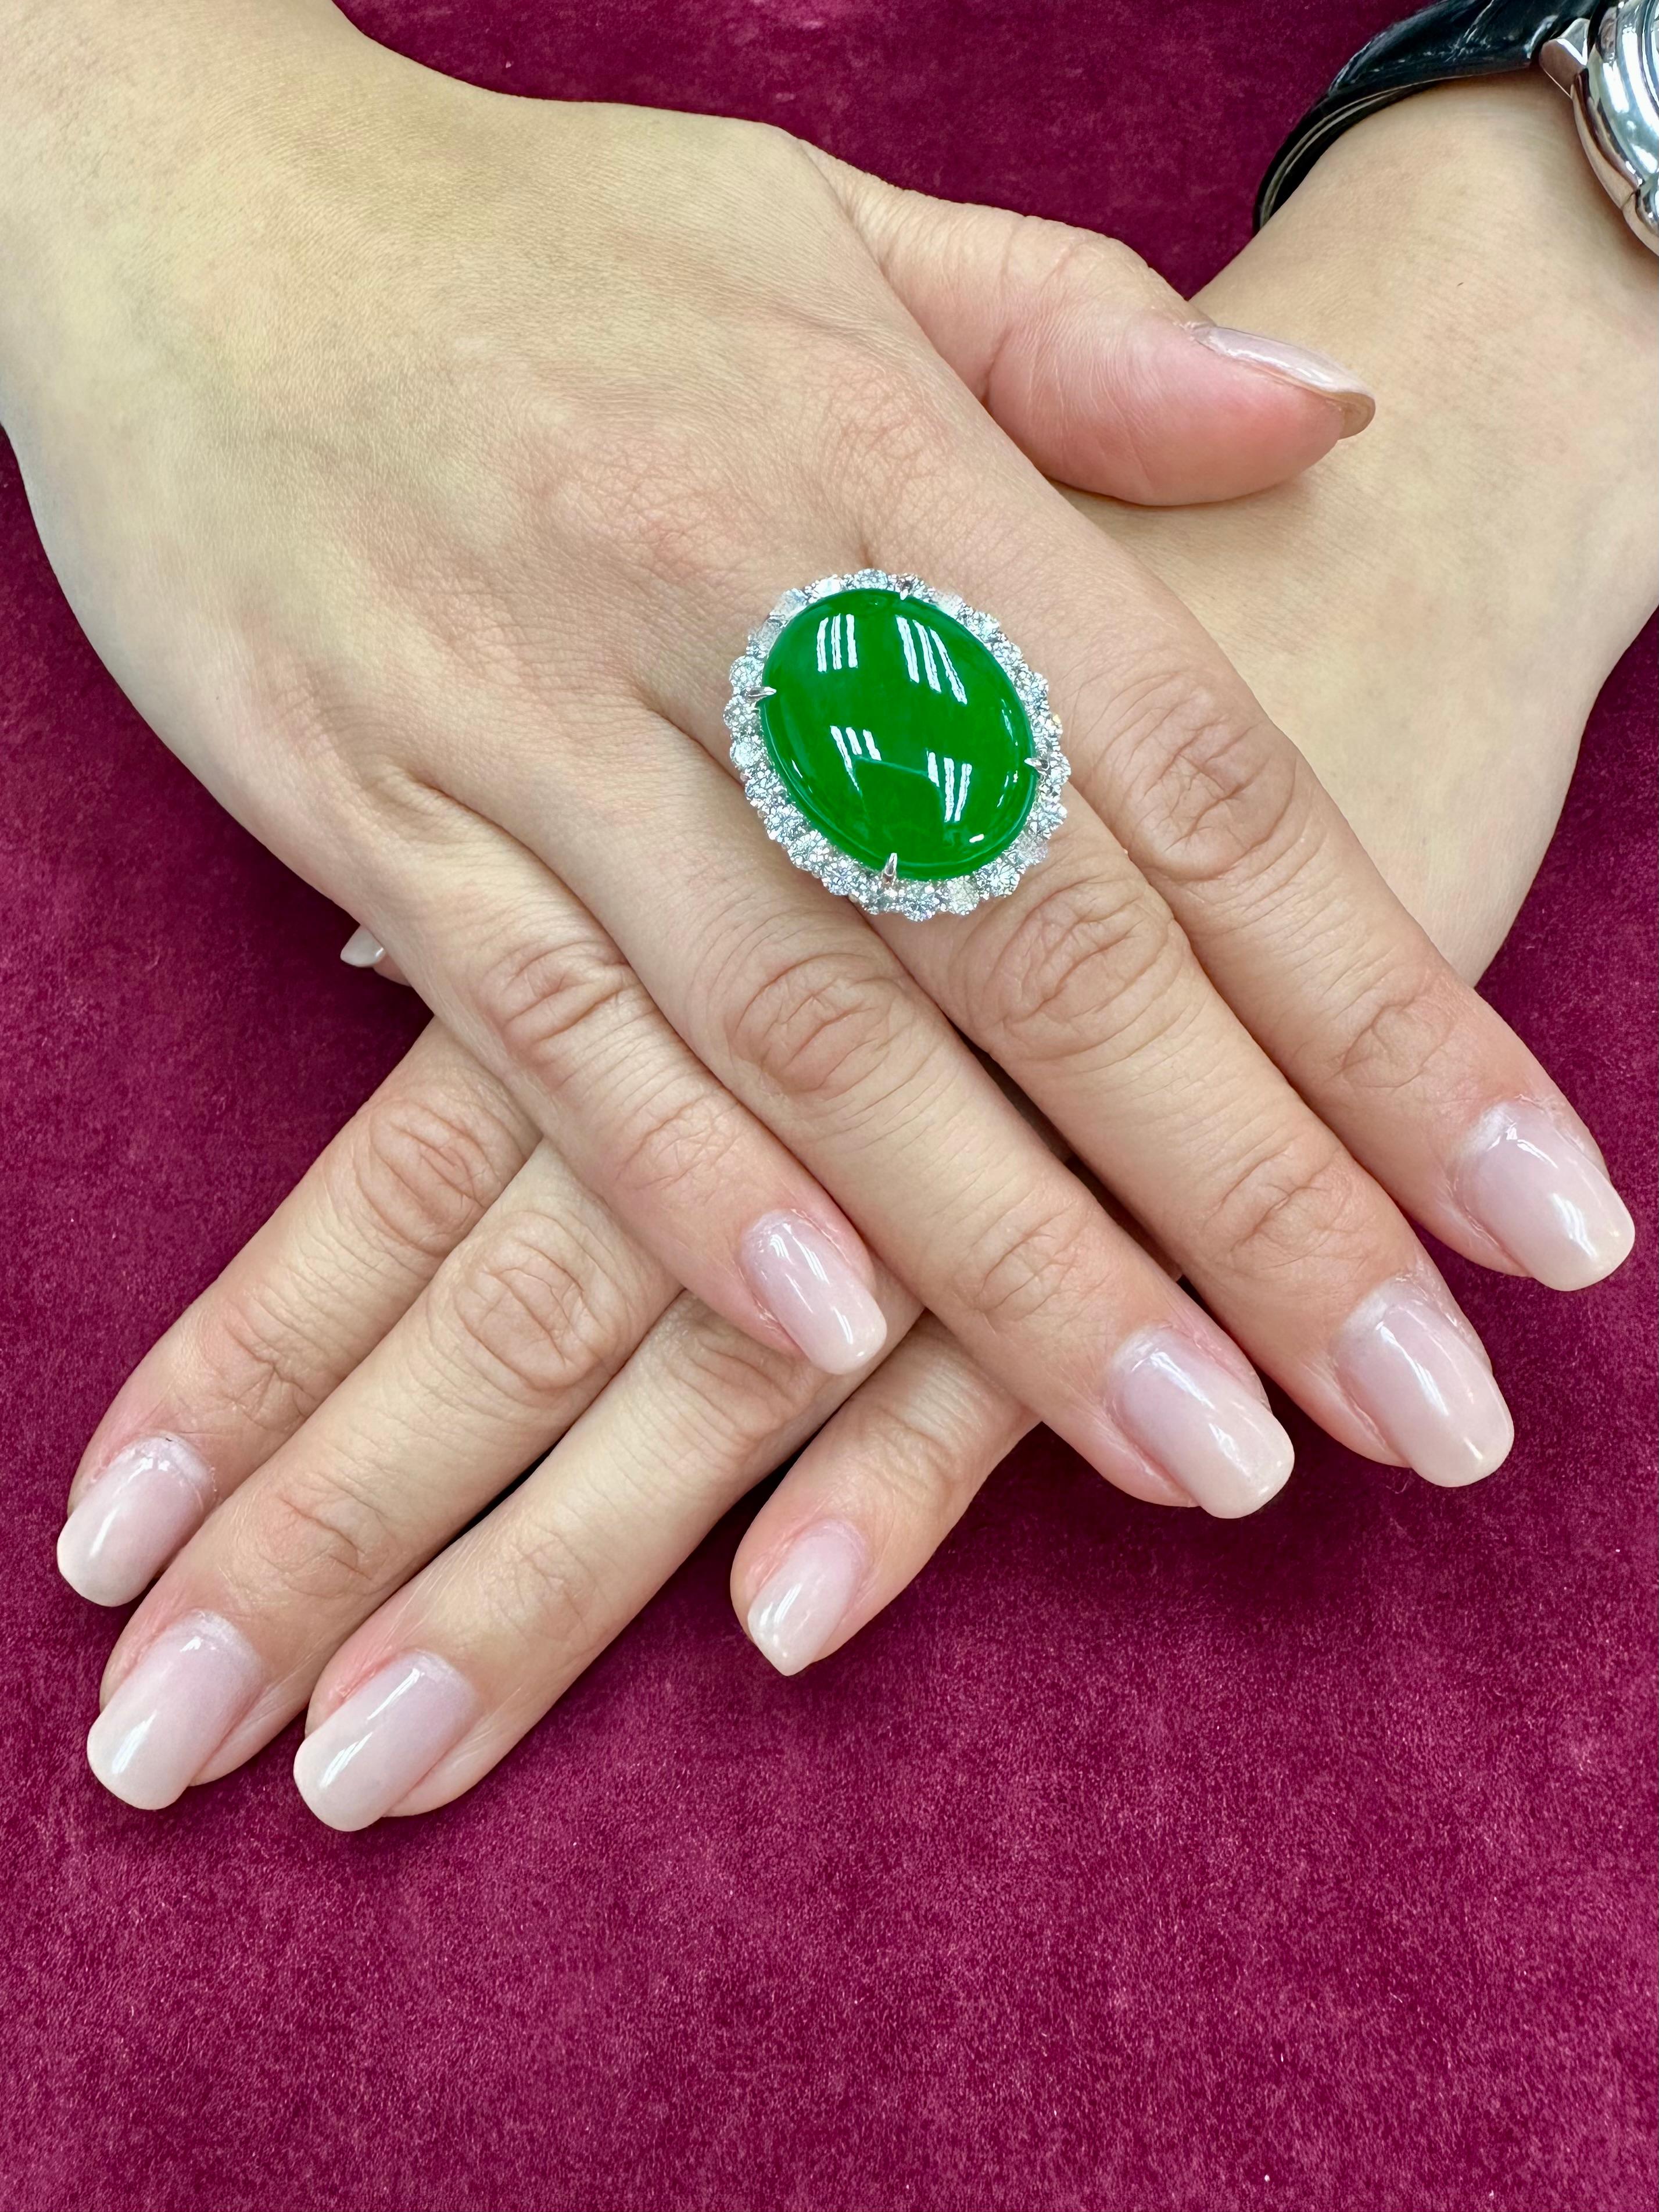 PLEASE CHECK OUT THE HD VIDEO! This jade is intense apple green (borderline imperial green) in color. It is an extra larger 22.7 x 17.6 mm natural jade at 21.28 cts and not backed to show the true color. Diamonds (total 2.27cts) are everywhere in